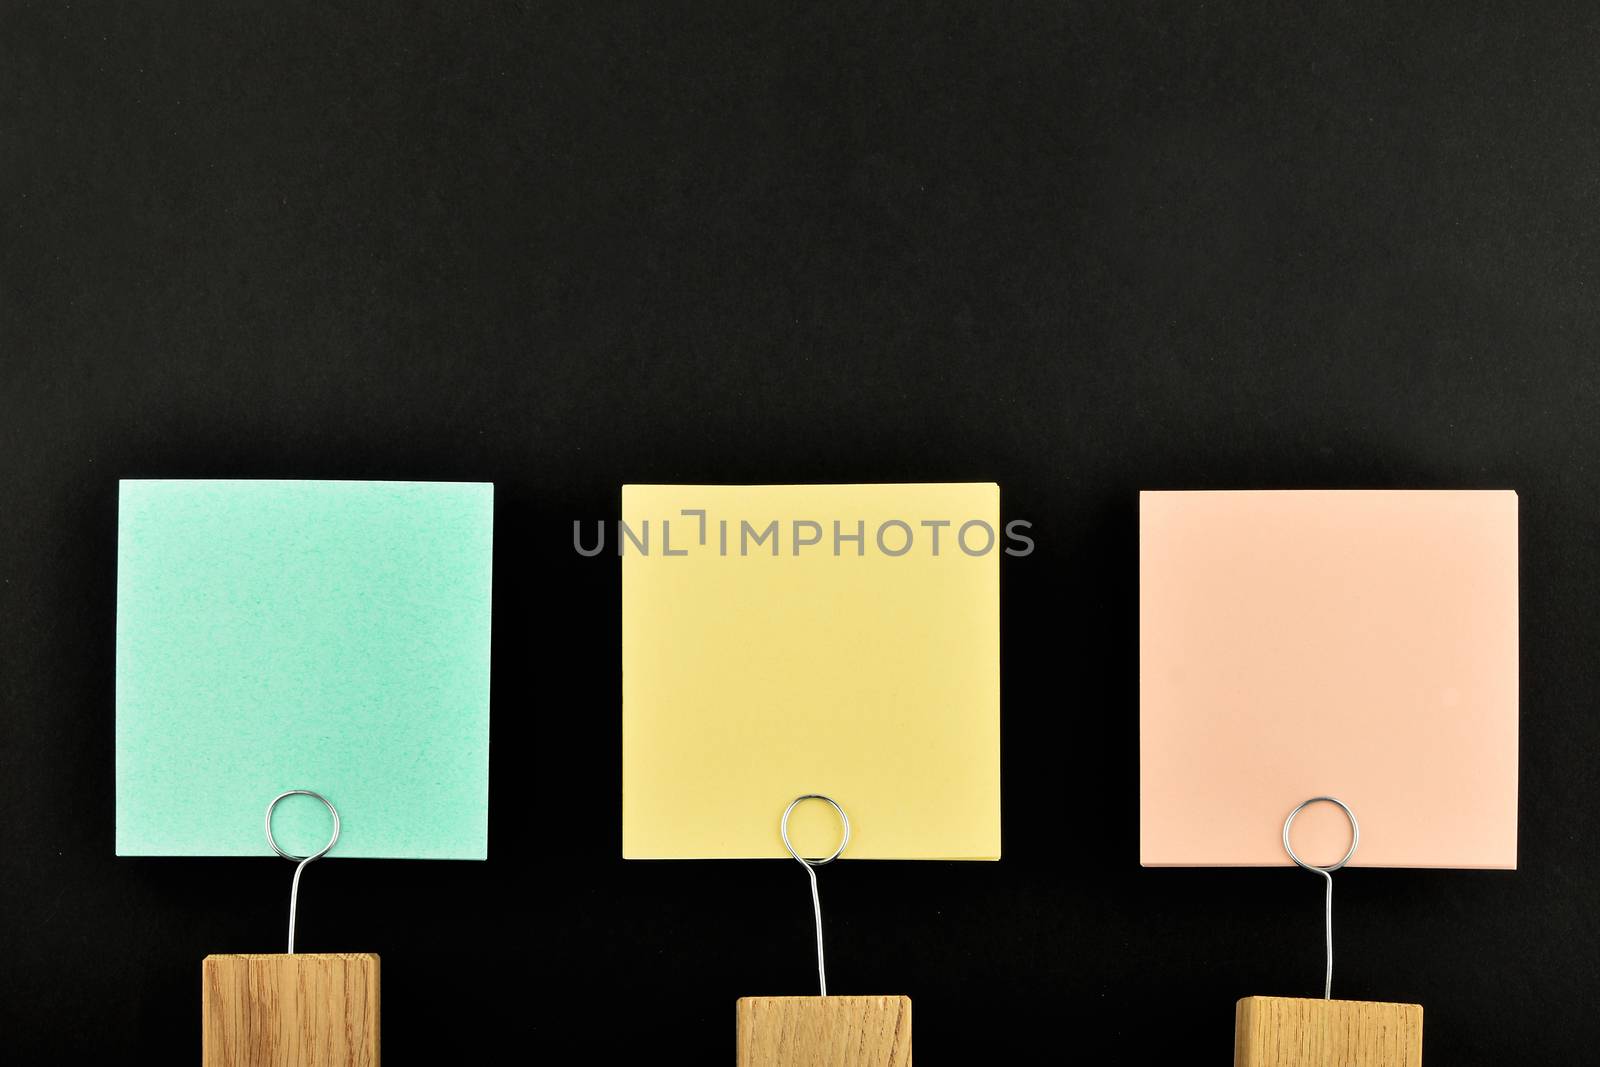 Three paper notes, green, yellow, pink, with wooden holder isolated on black paper background for presentation